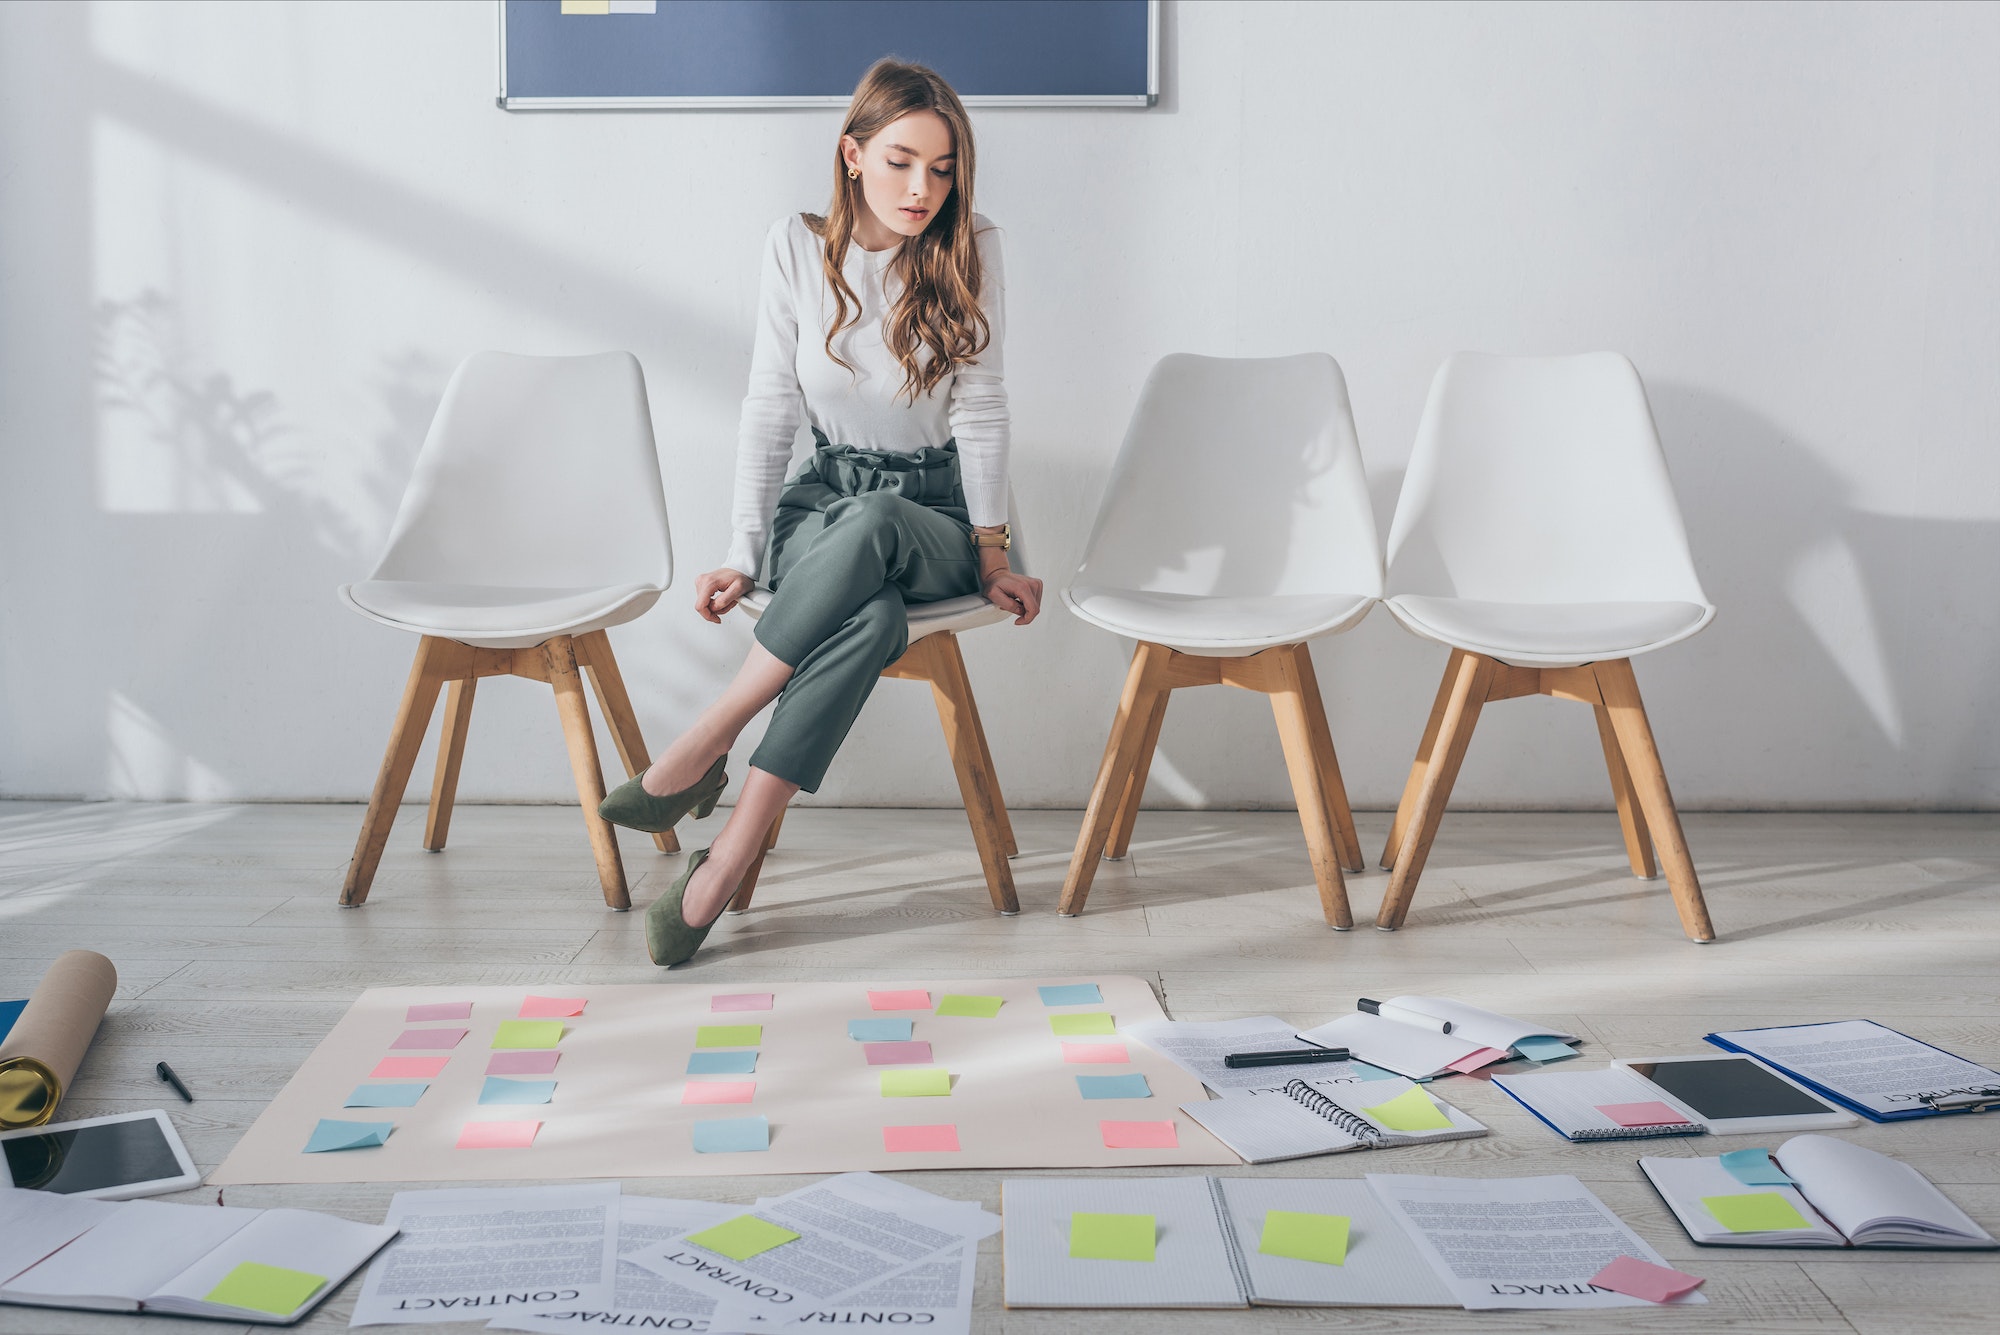 attractive scrum master sitting on chair near sticky notes on floor